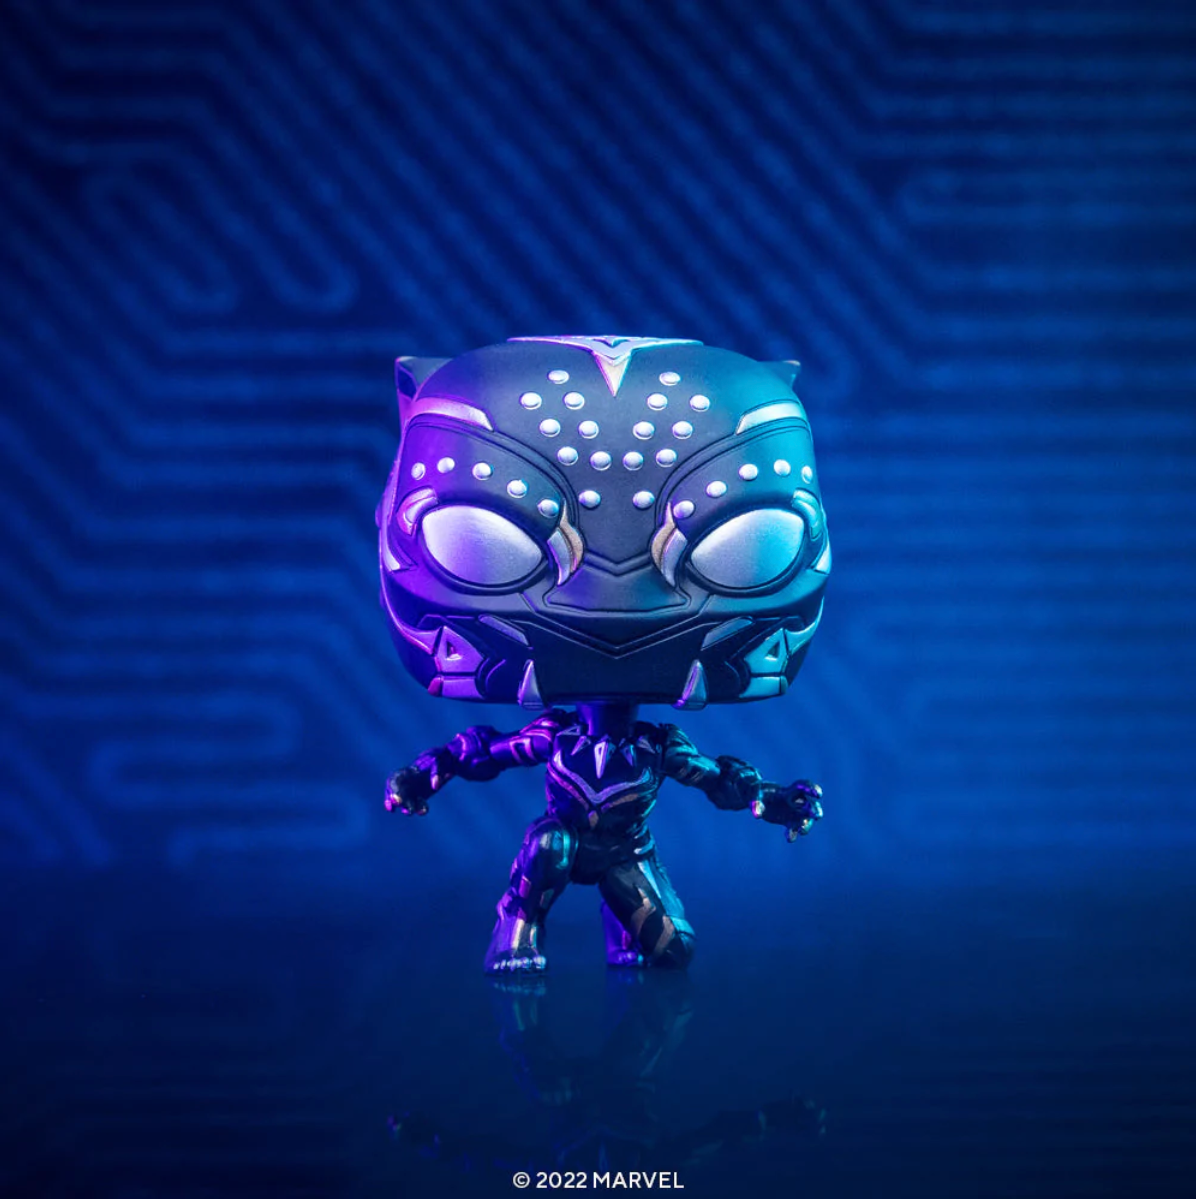 Load image into Gallery viewer, Black Panther (Black Panther: Wakanda Forever) Marvel Funko Pop!
